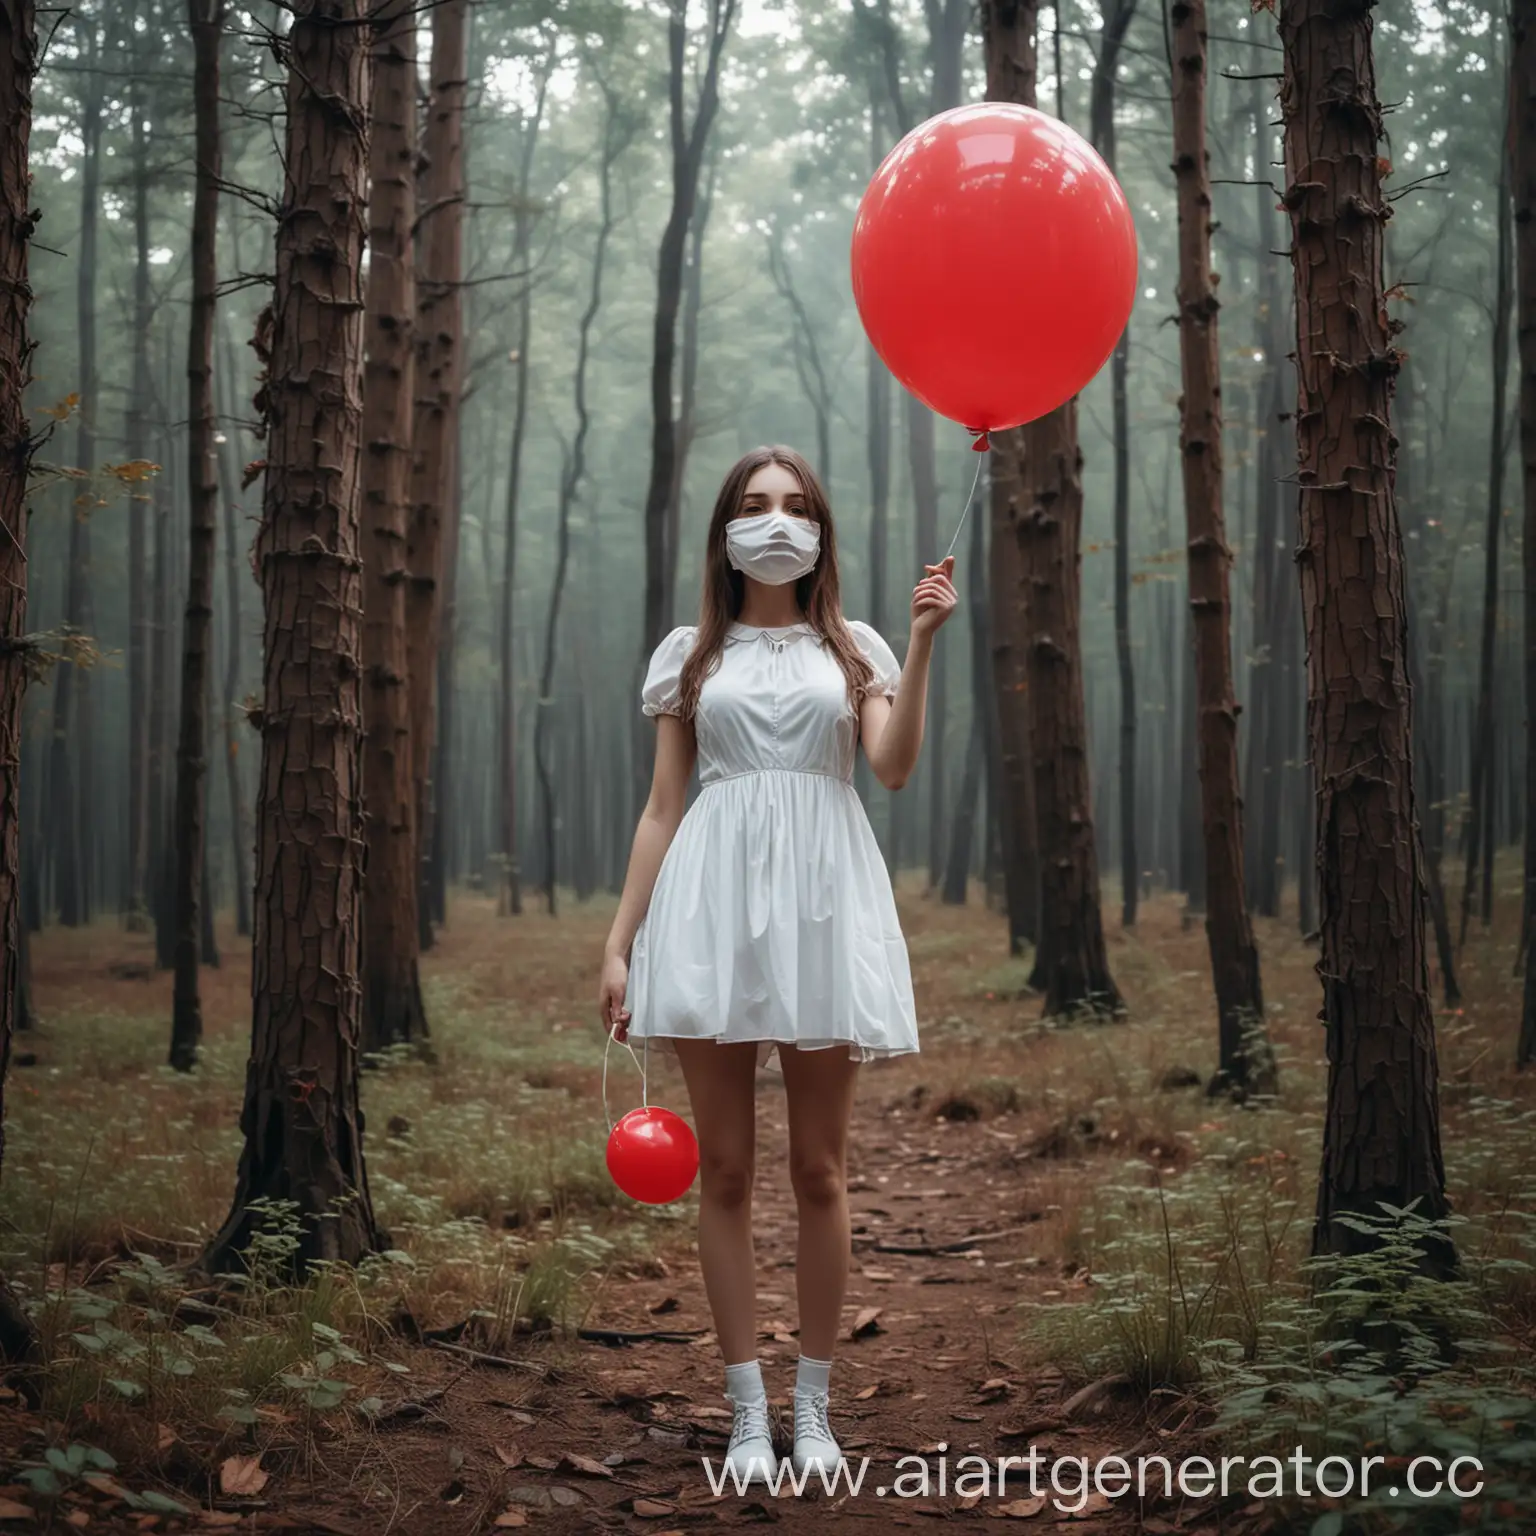 Lonely-Girl-in-White-Dress-Holding-Deflated-Red-Balloon-in-Enchanted-Forest